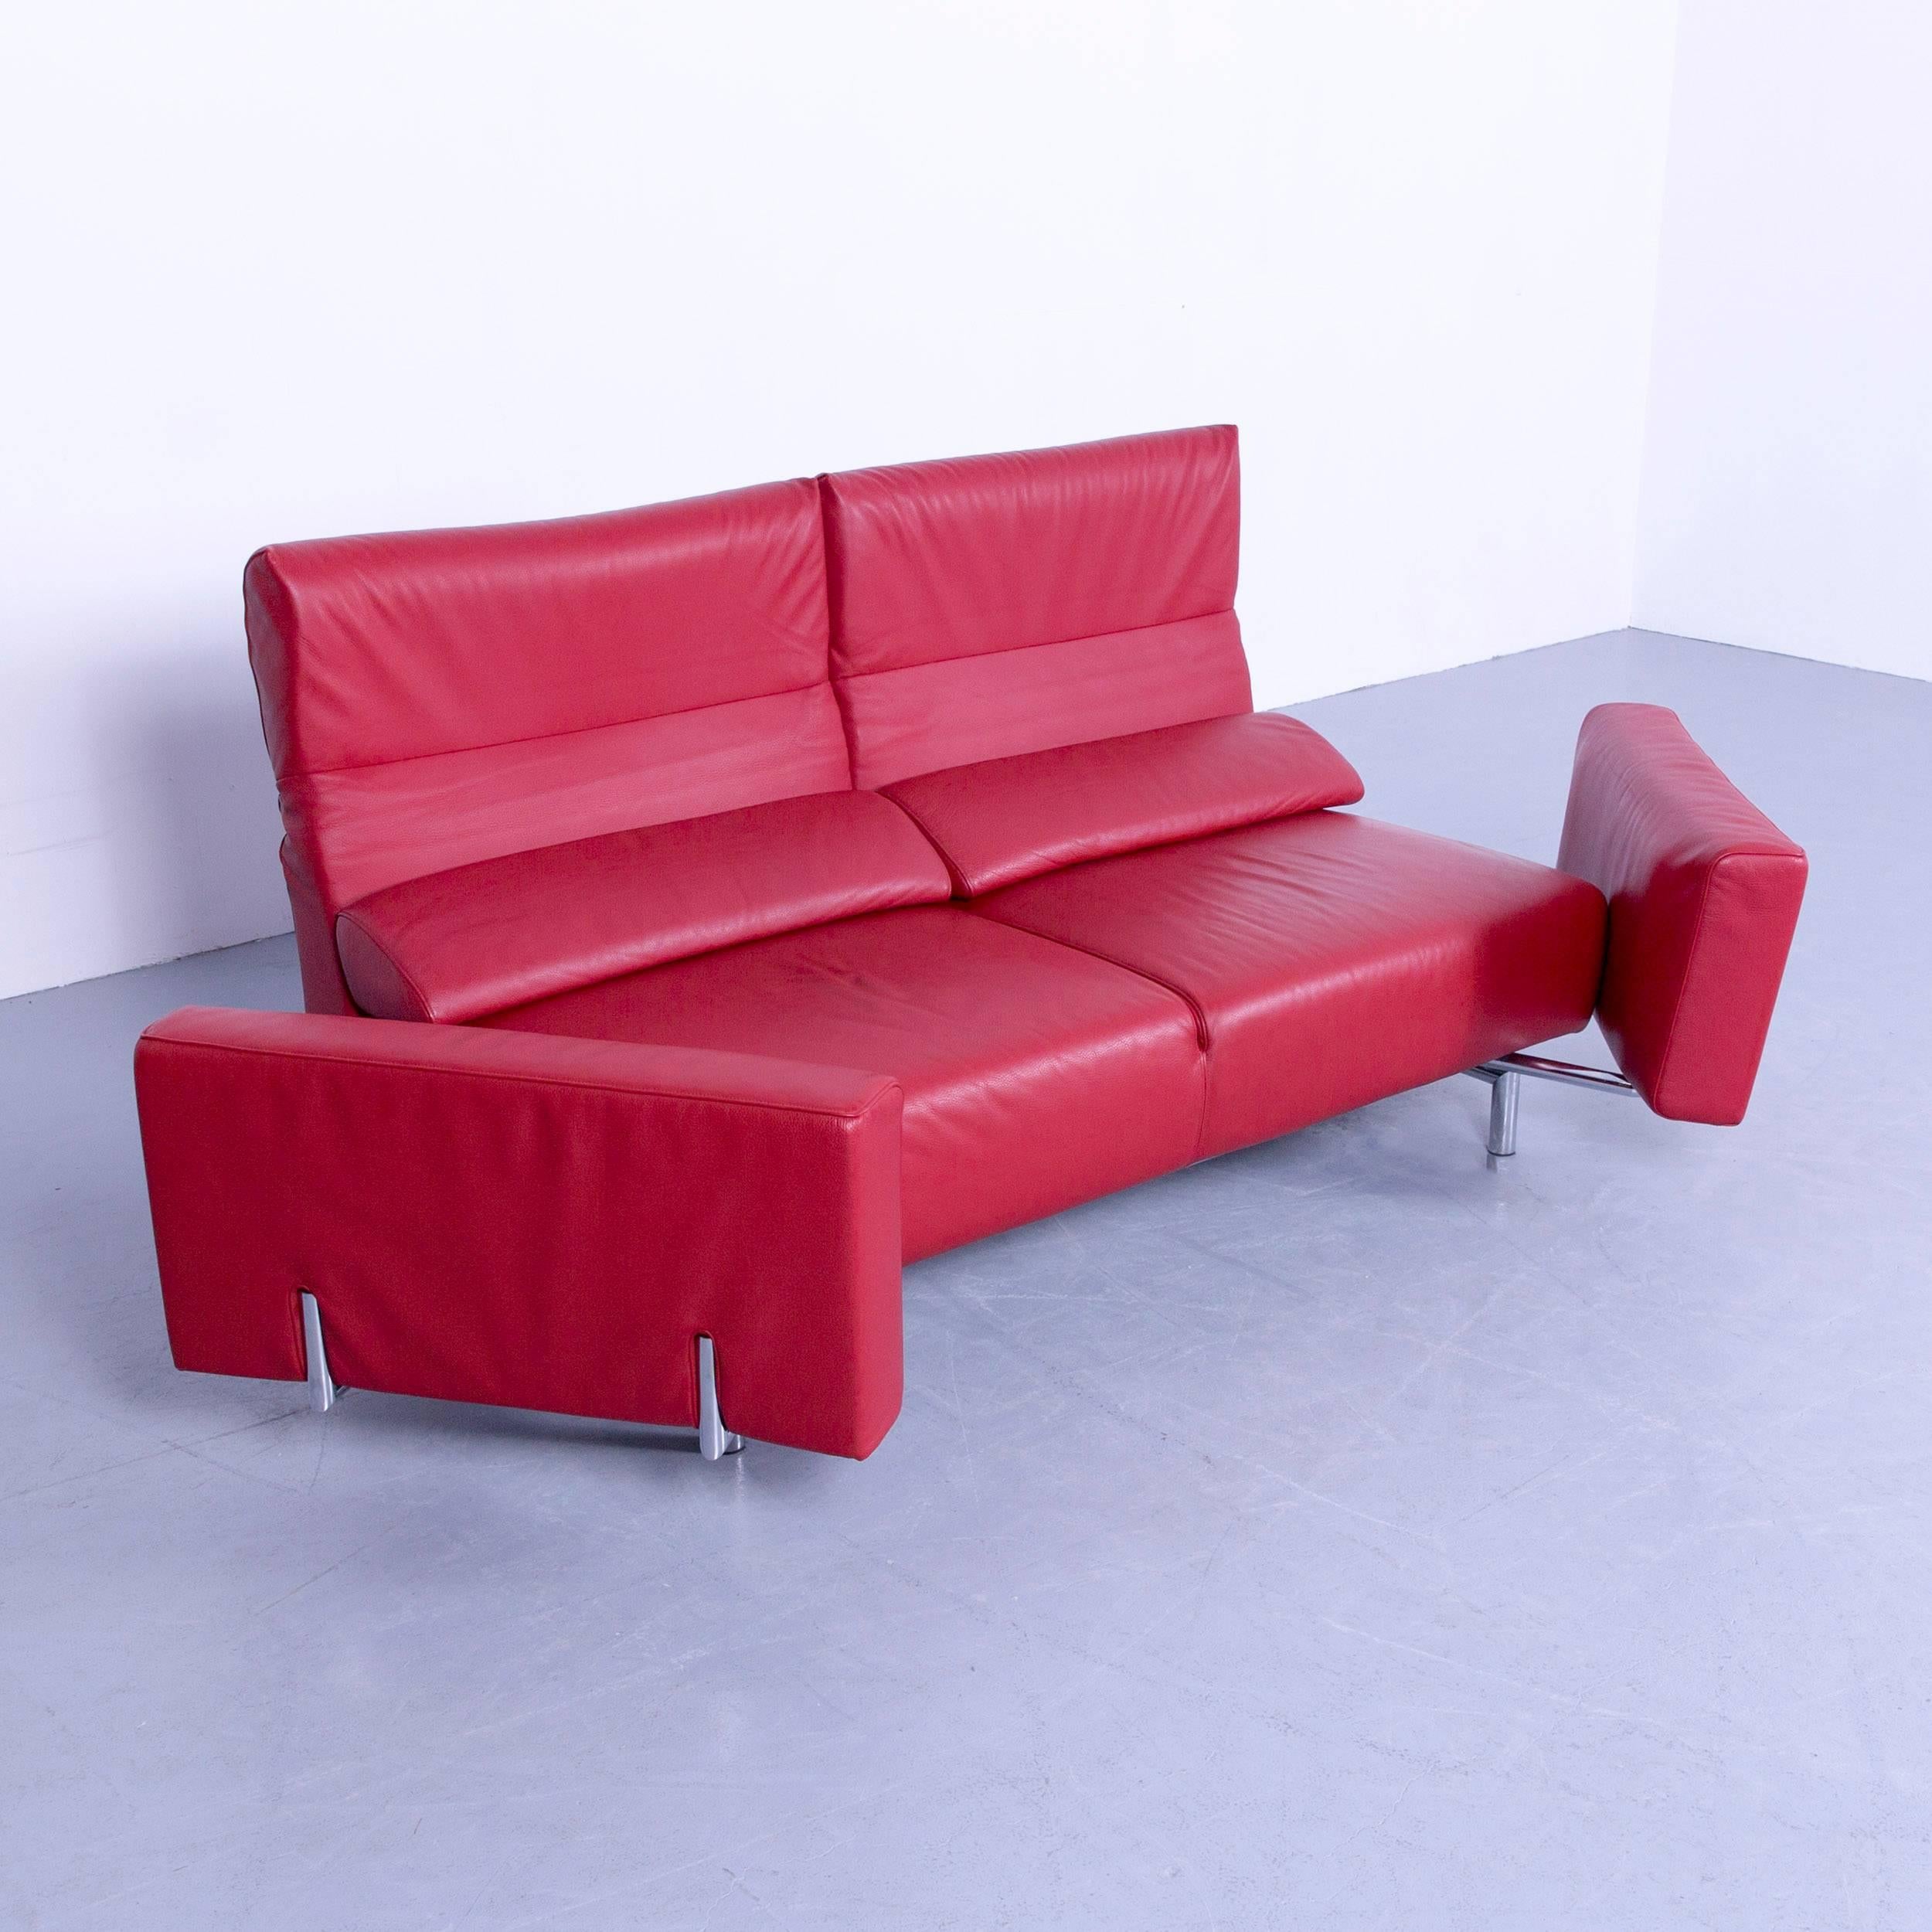 Contemporary Strässle Matteo Designer Sofa Leather Red Relax Function Two-Seat Modern For Sale